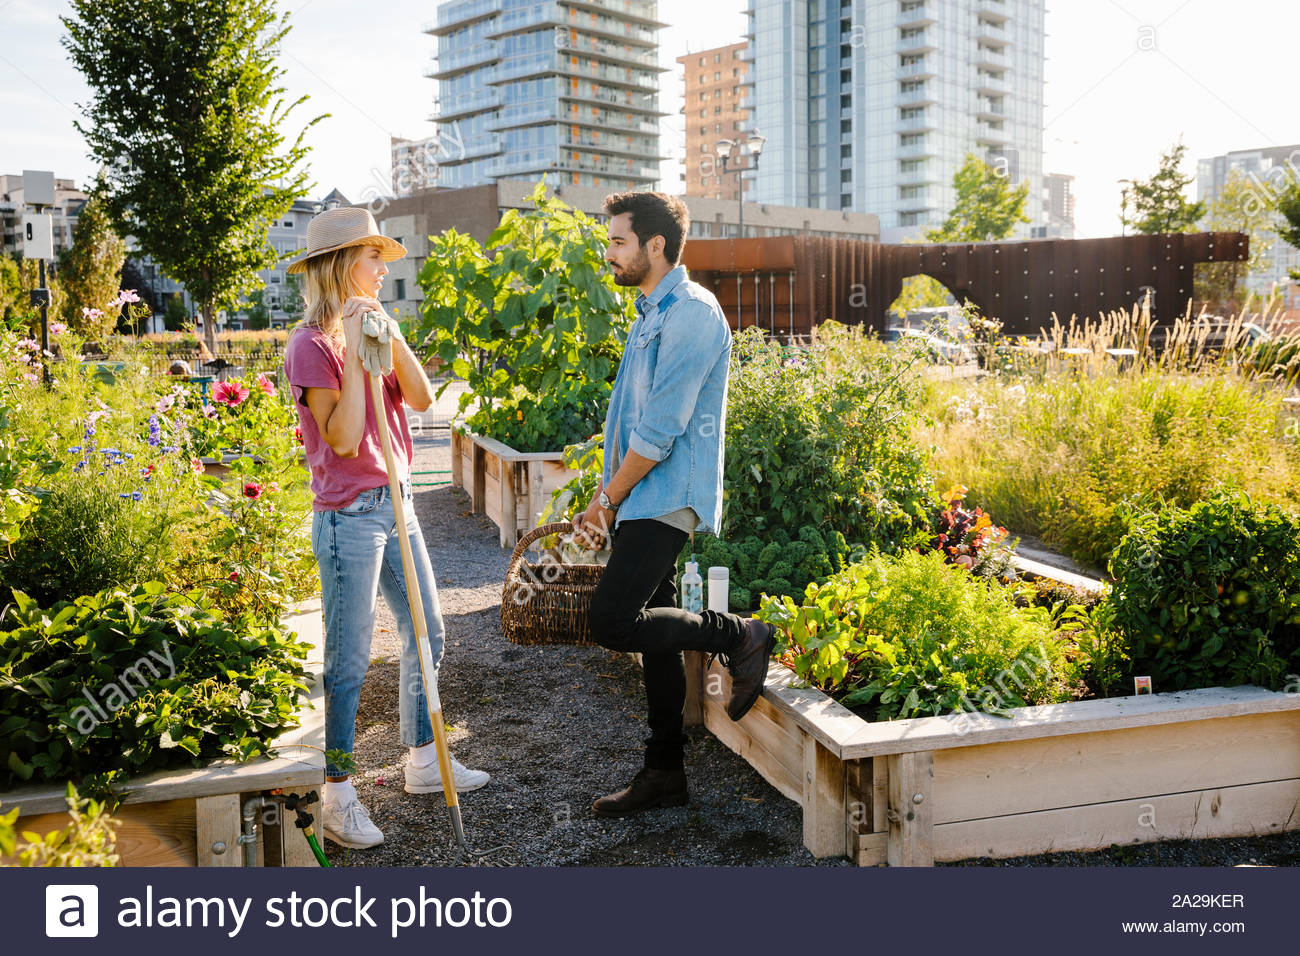 Young couple talking in sunny, urban community garden Stock Photo